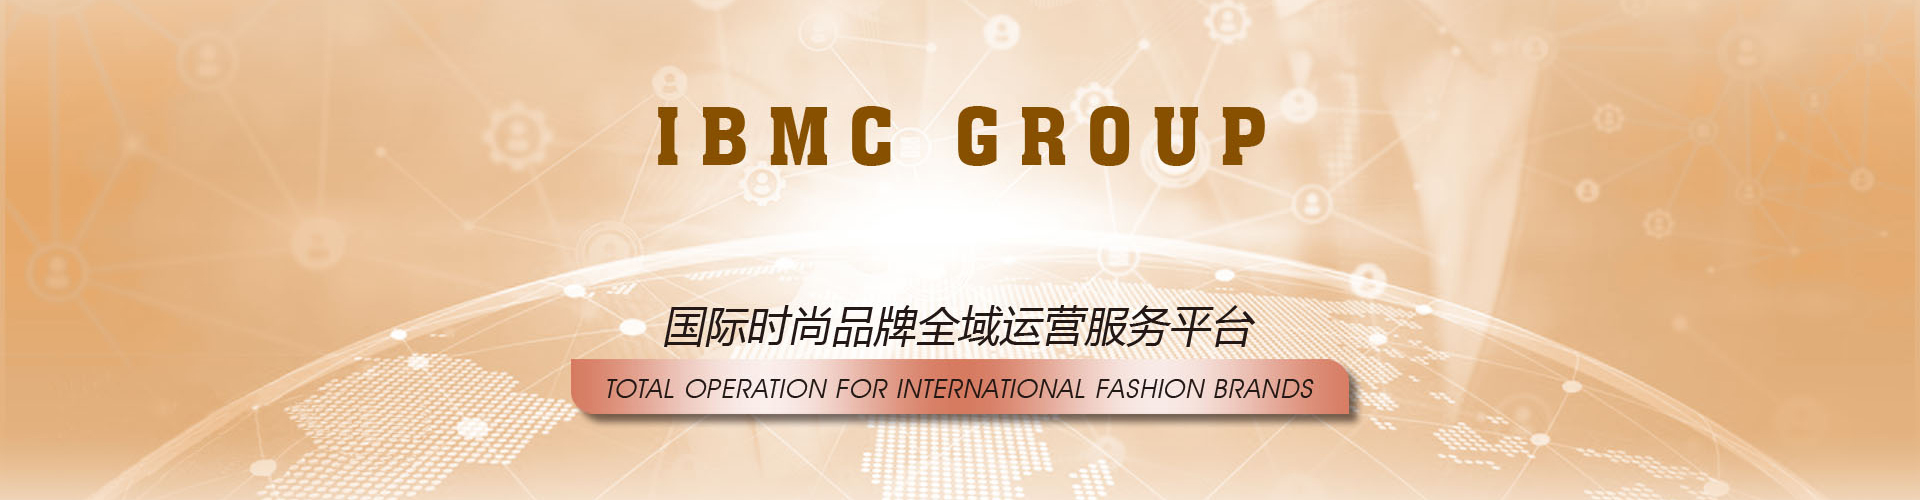 IBMC Group- Business Divisions